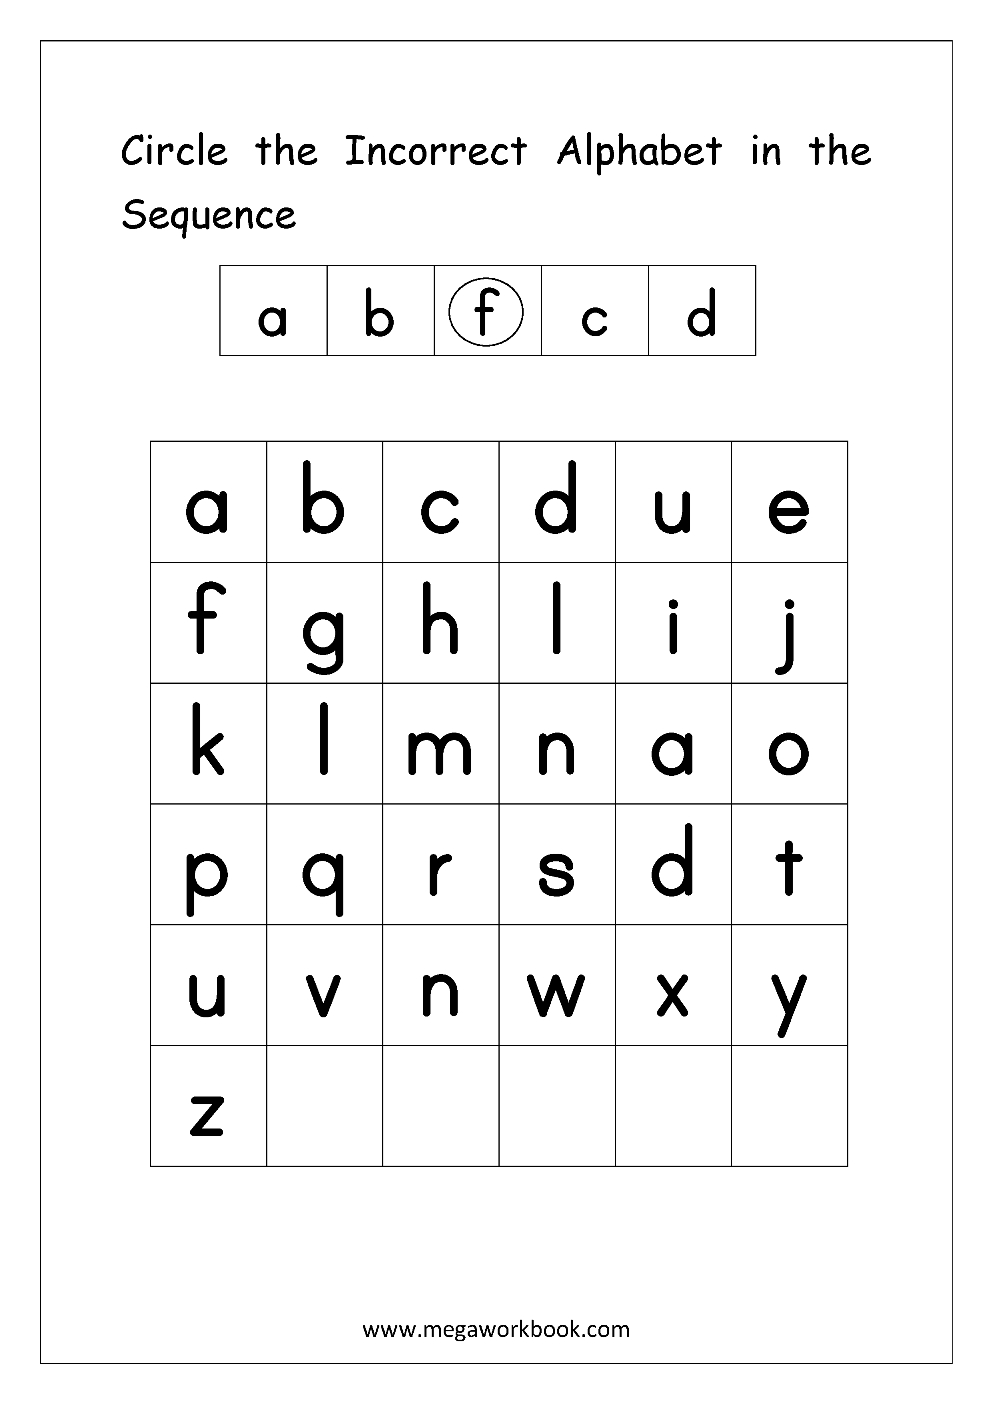 Alphabet Ordering Worksheet - Small Letters - Circle